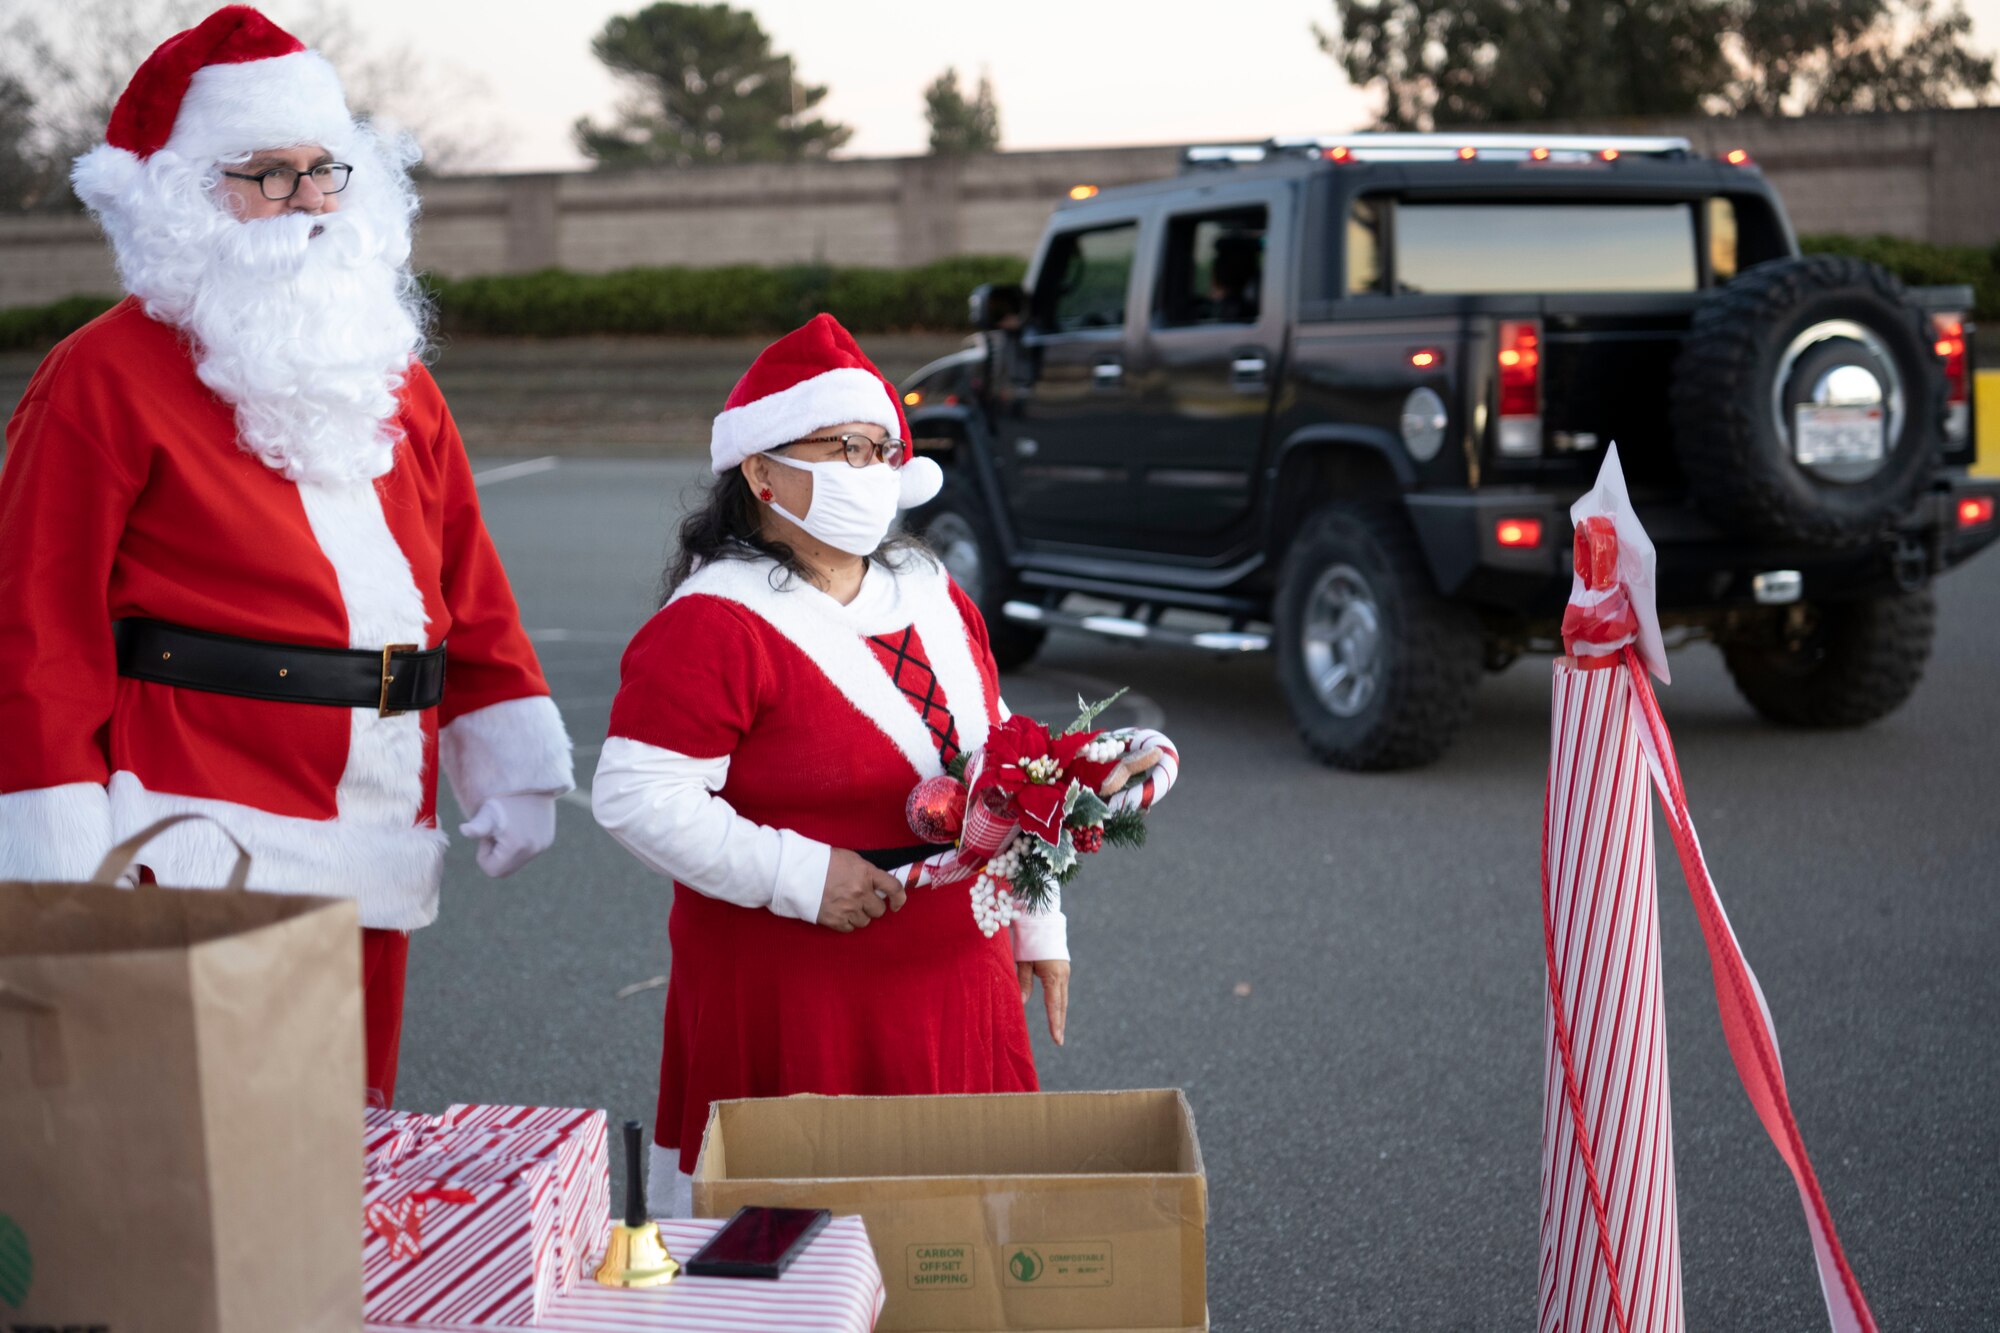 Retired U.S. Air Force Master Sgt. Michael Ward, accounts payable technician at the 60th Aerial Port Squadron, left, and spouse Susan Ward, dietary technician at 60th Medical Group, prepare to hand out gifts Dec. 18 at the Candy Cane Lane drive-thru at Travis Air Force Base, California. During the event, volunteers handed out 260 gift bags to Airmen and their families. (U.S. Air Force photo by Airman 1st Class Alexander Merchak)